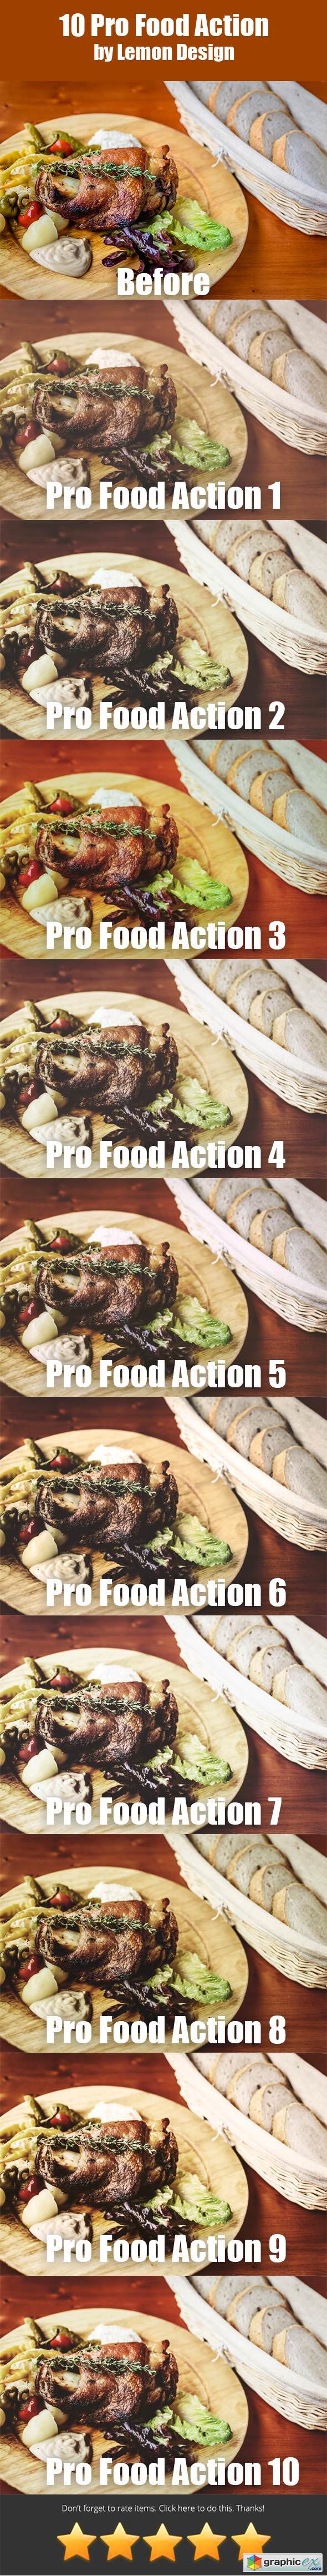 10 Pro Food Action